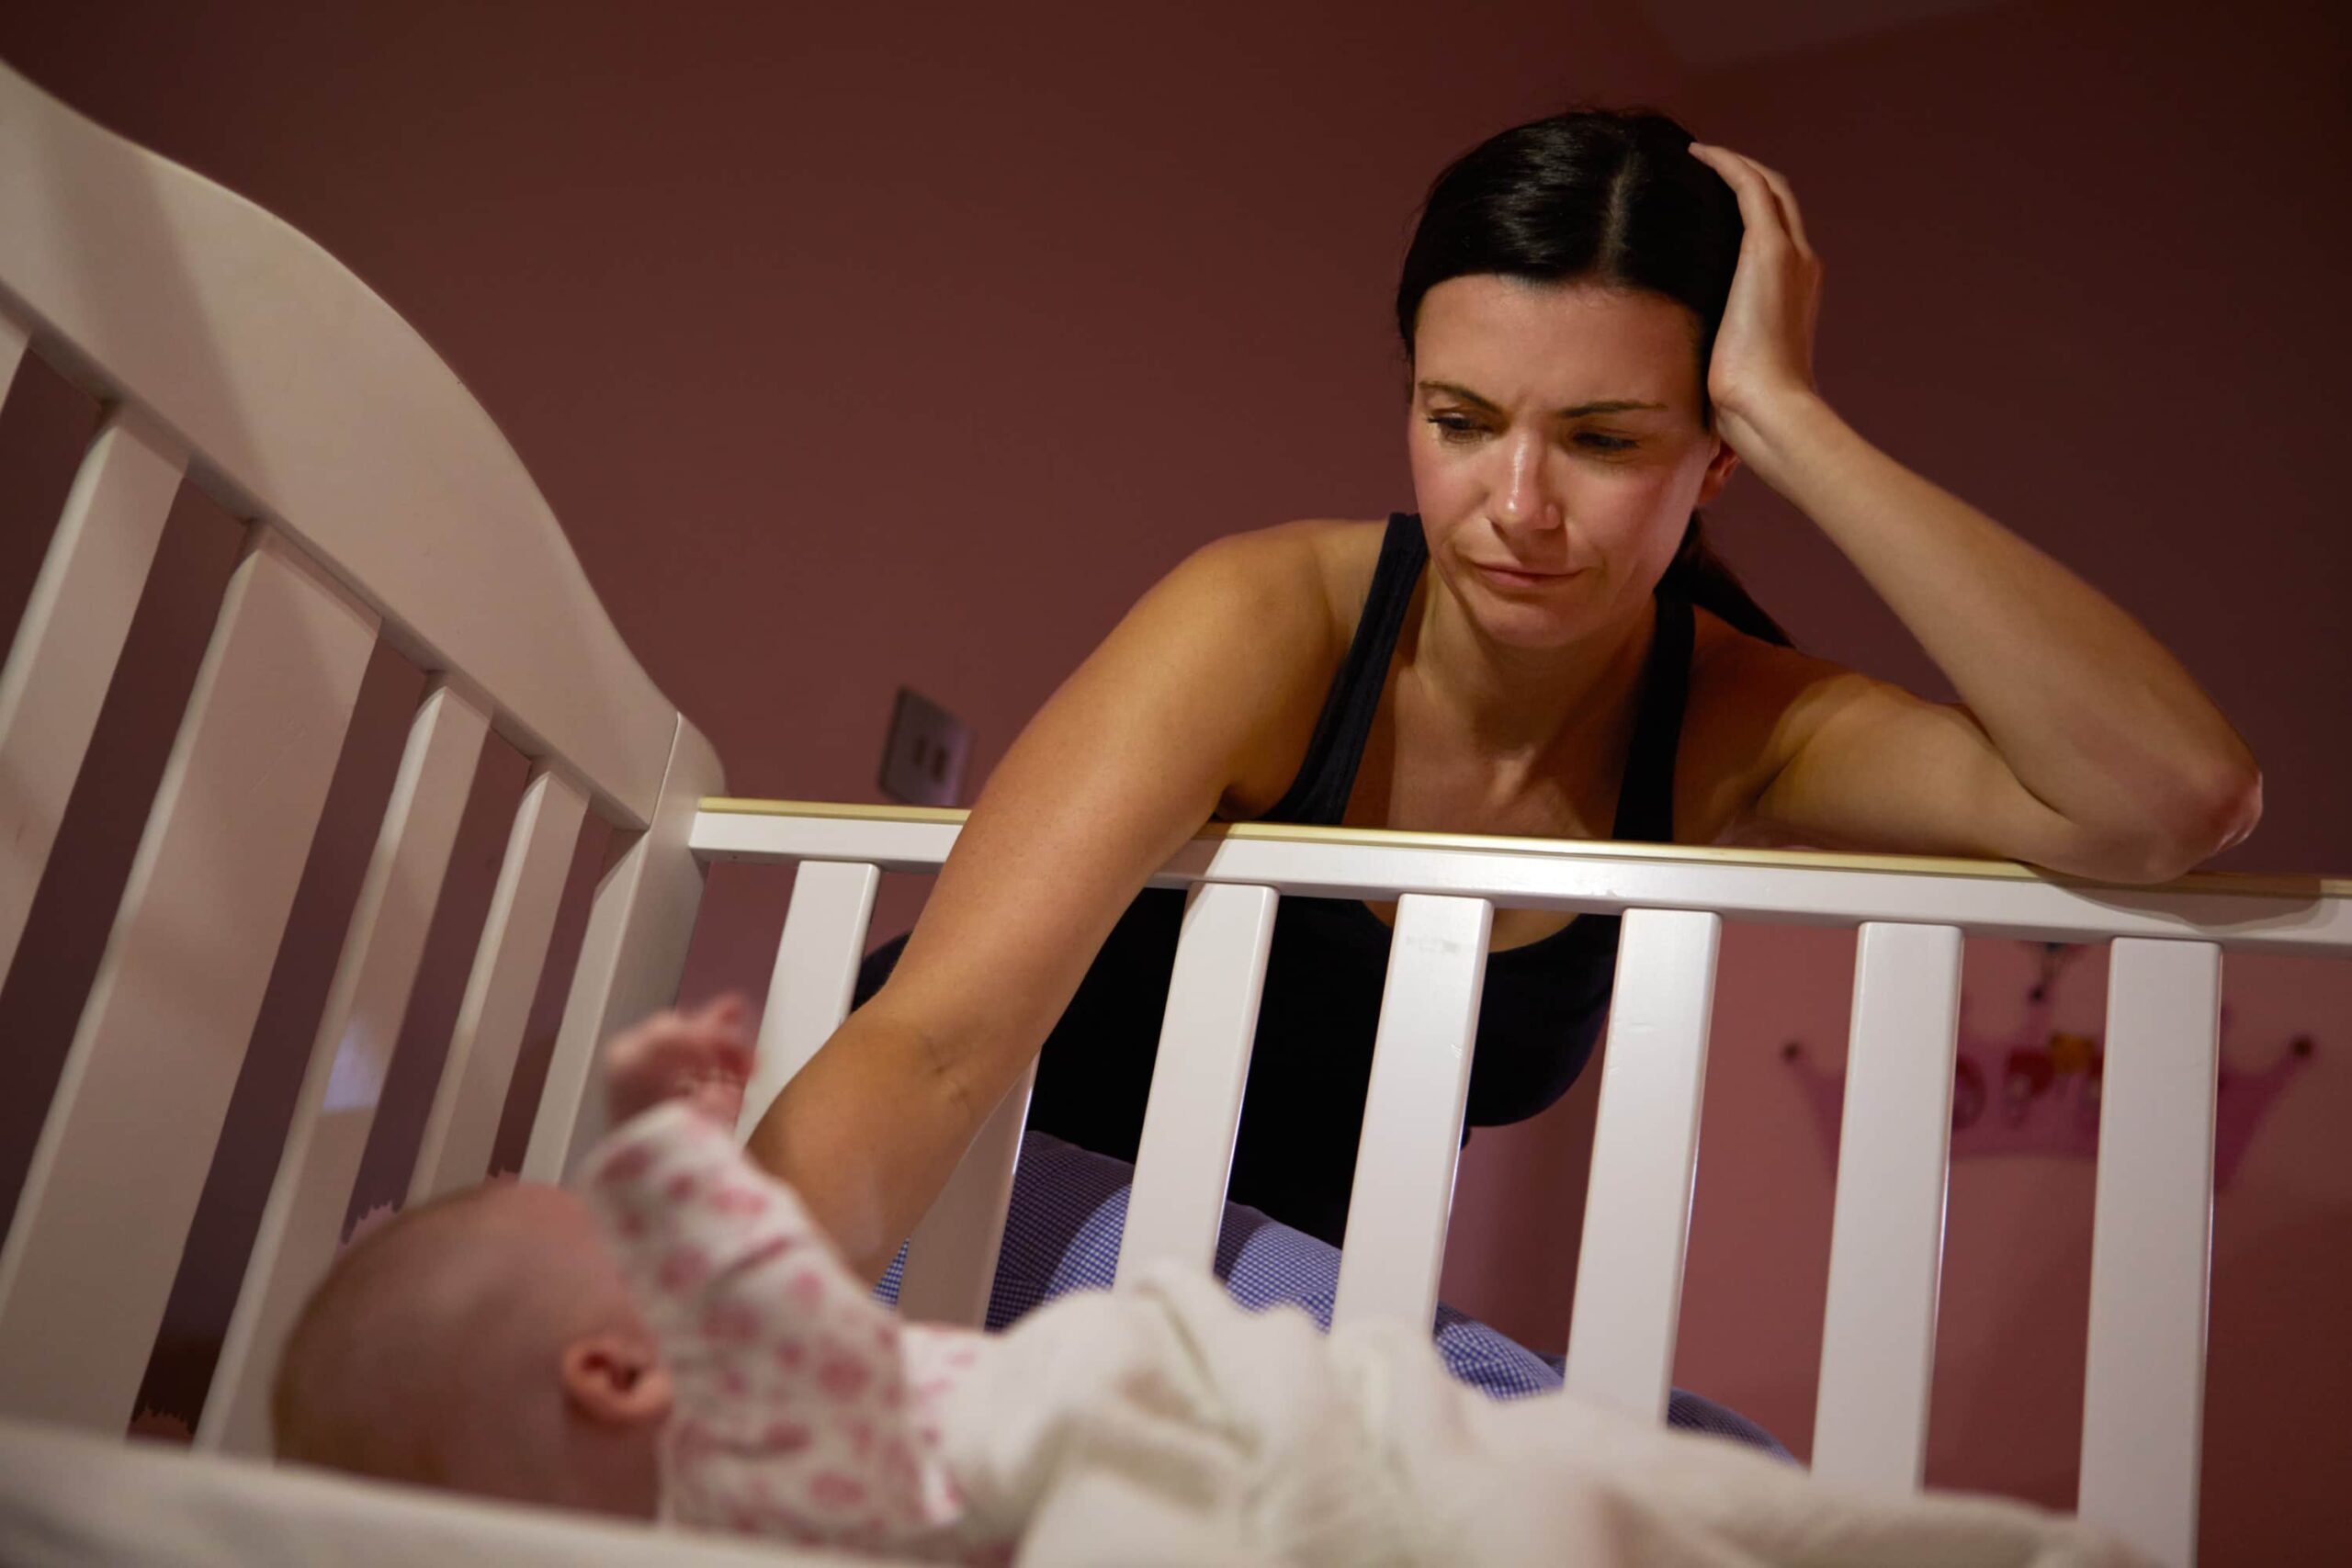 Baby Sleep: Why sleep training might not work & what to do instead